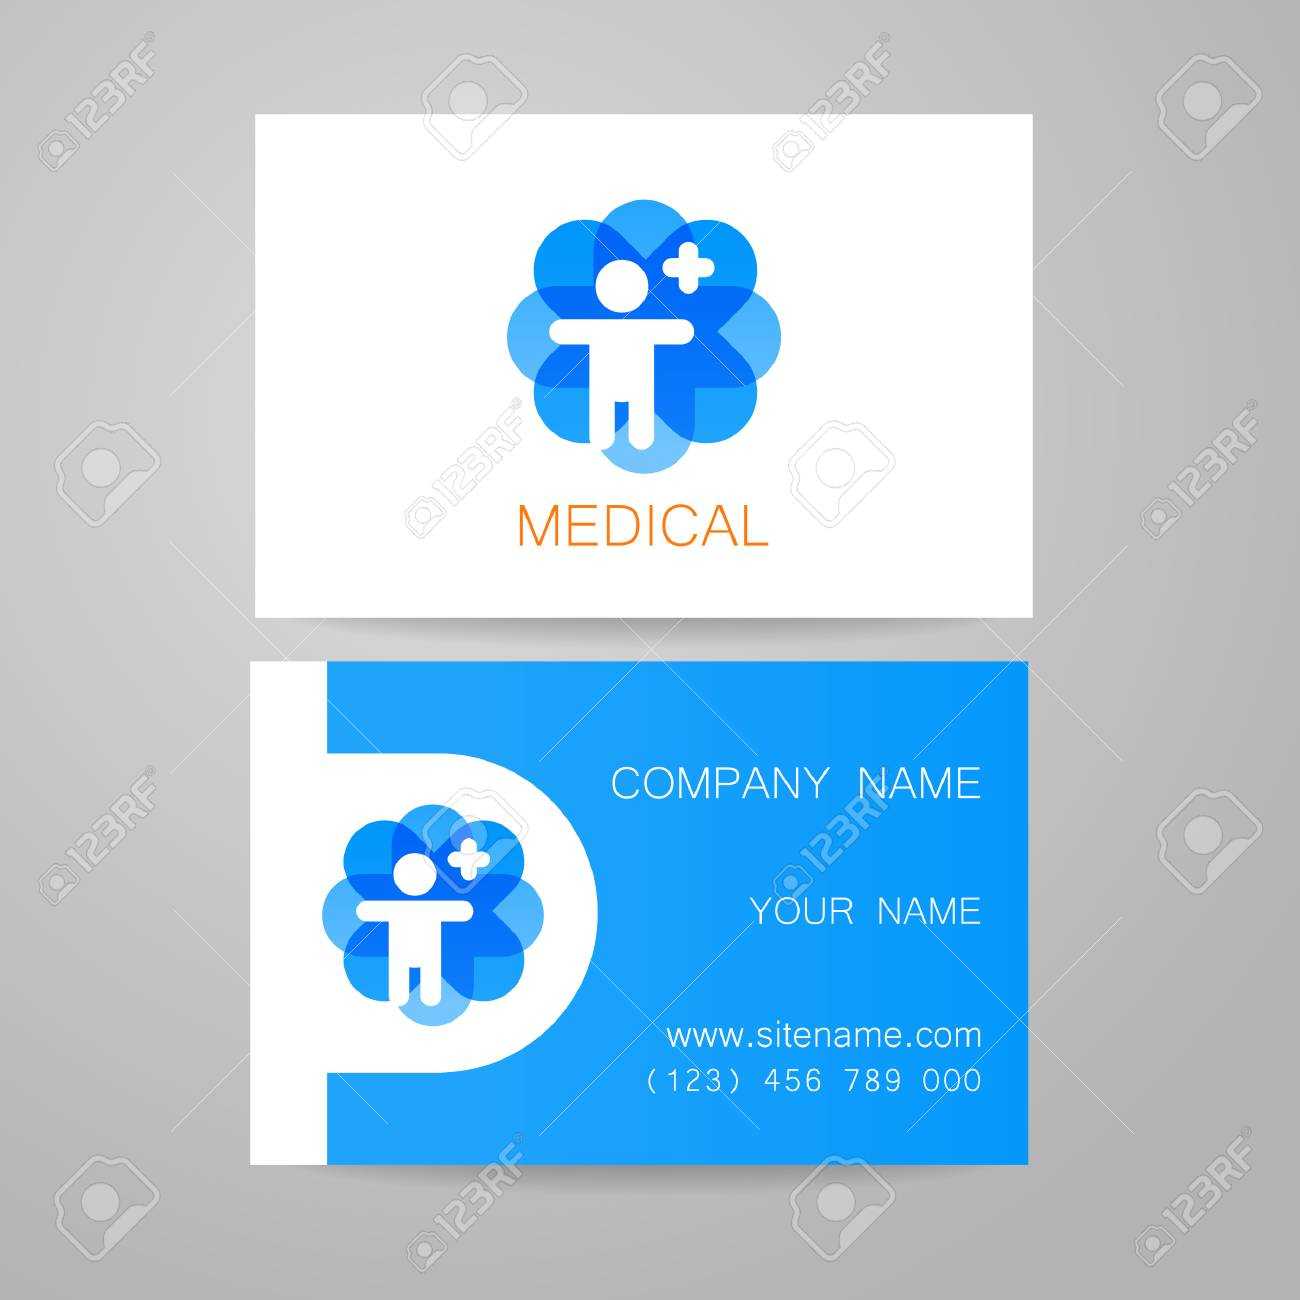 Template Of Medical Business Cards. In Medical Business Cards Templates Free